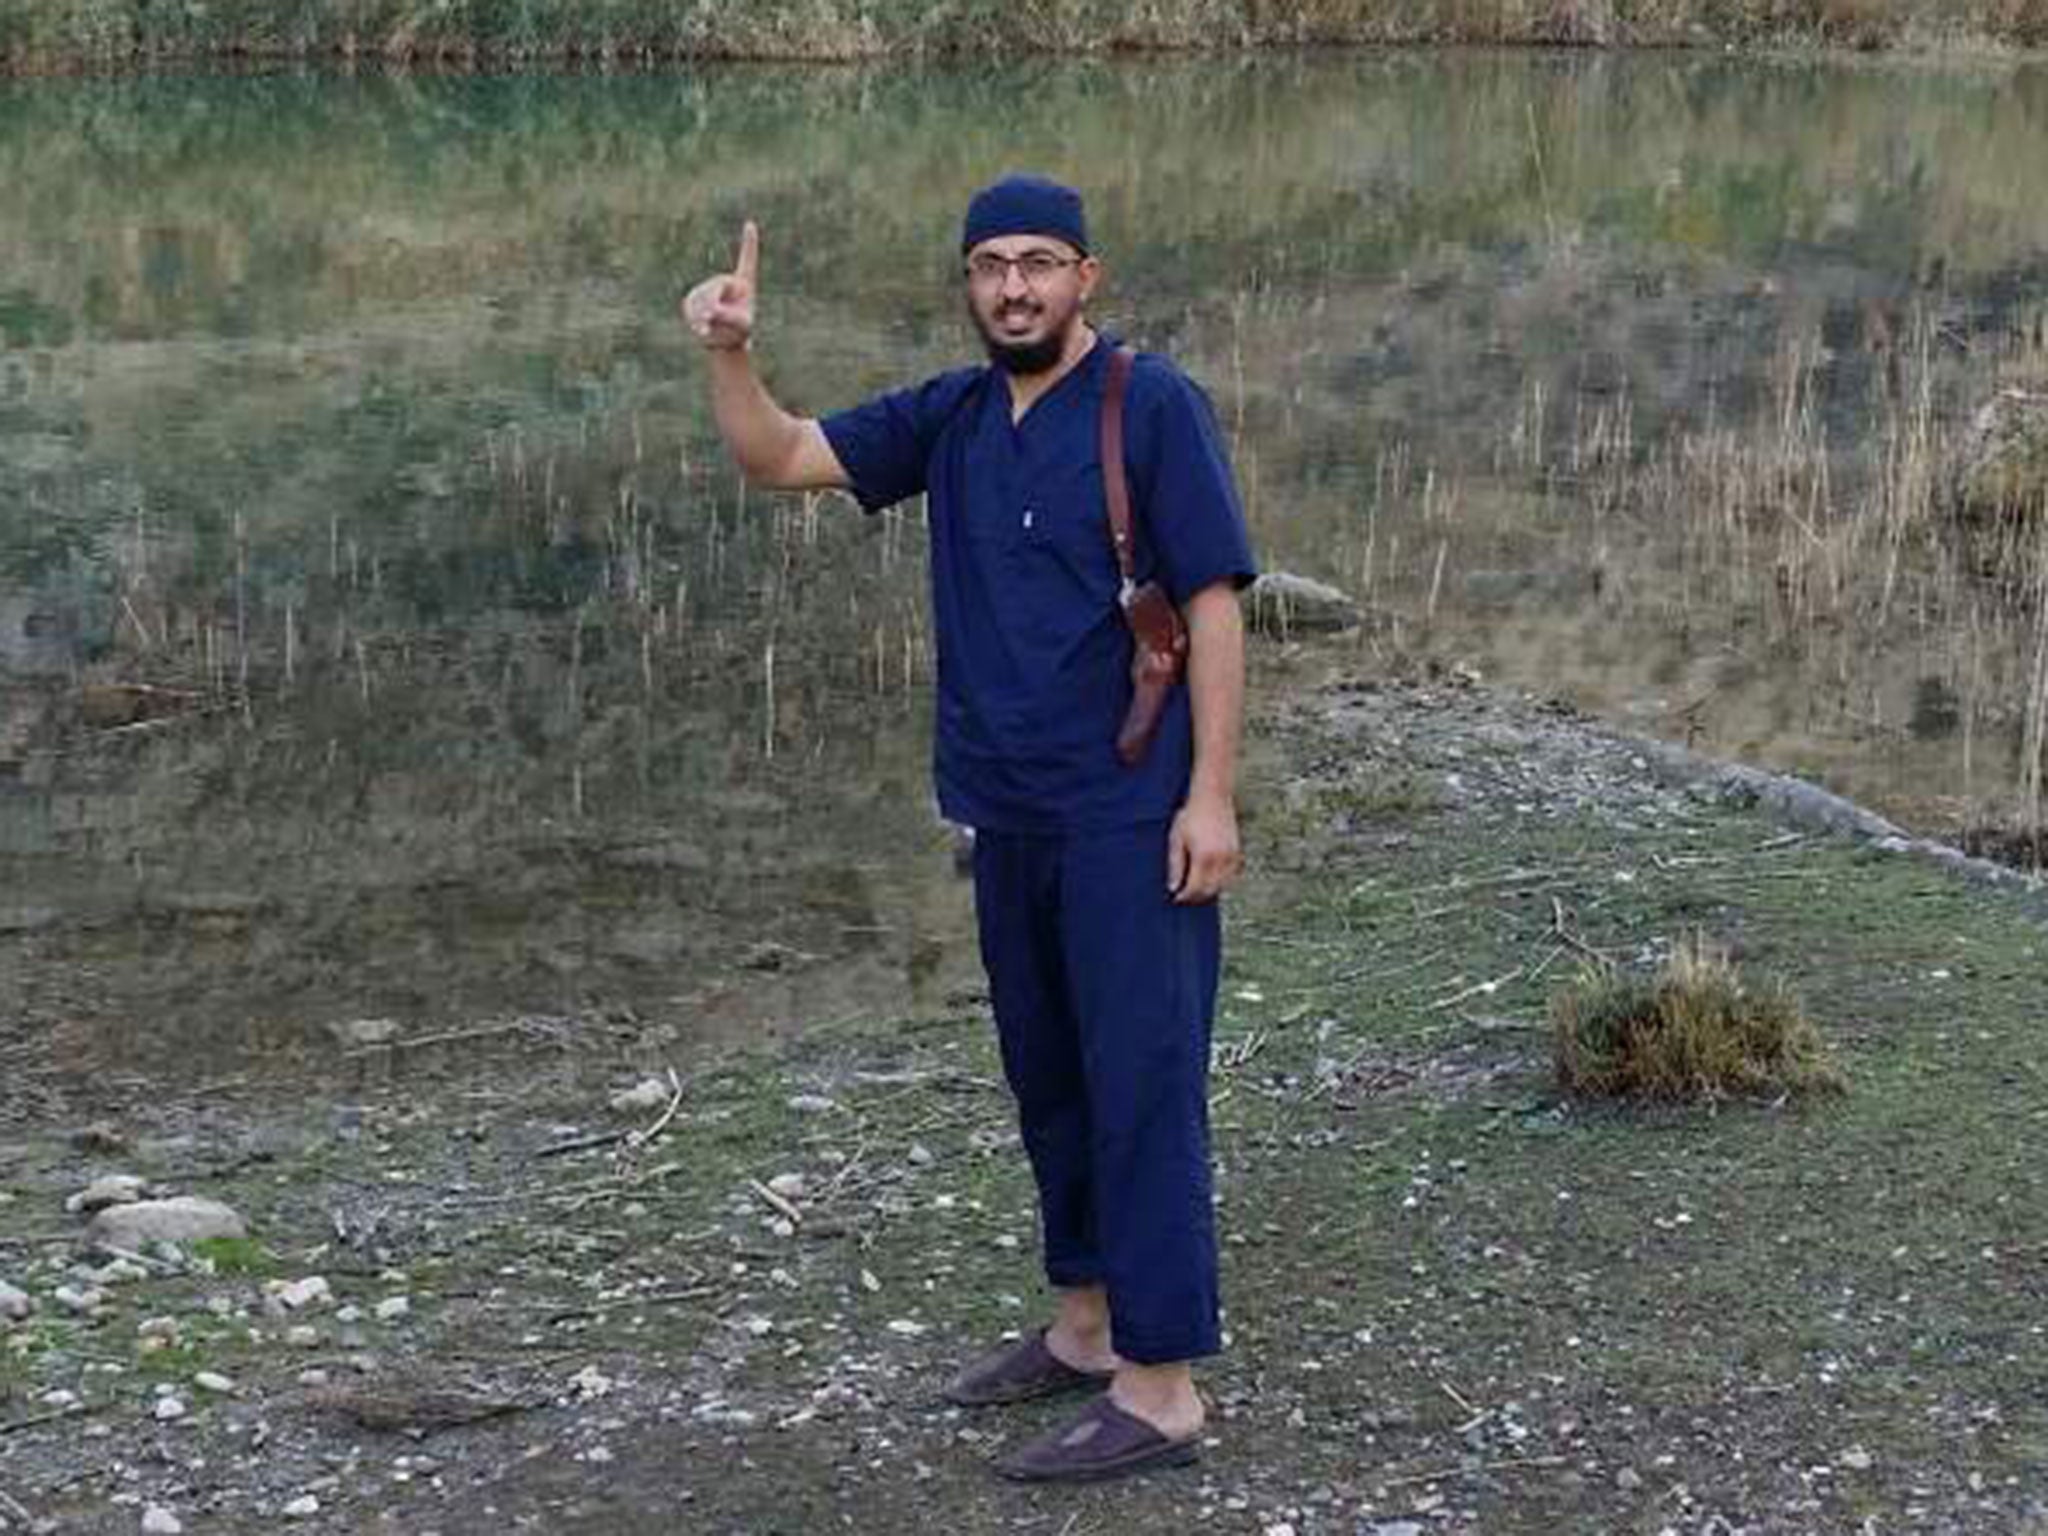 An image on Issam Abuanza's Facebook page shows him wearing doctors' scrubs and carrying a handgun in a holster, as he smiles and raises his index finger in the air in a gesture commonly associated with Isis